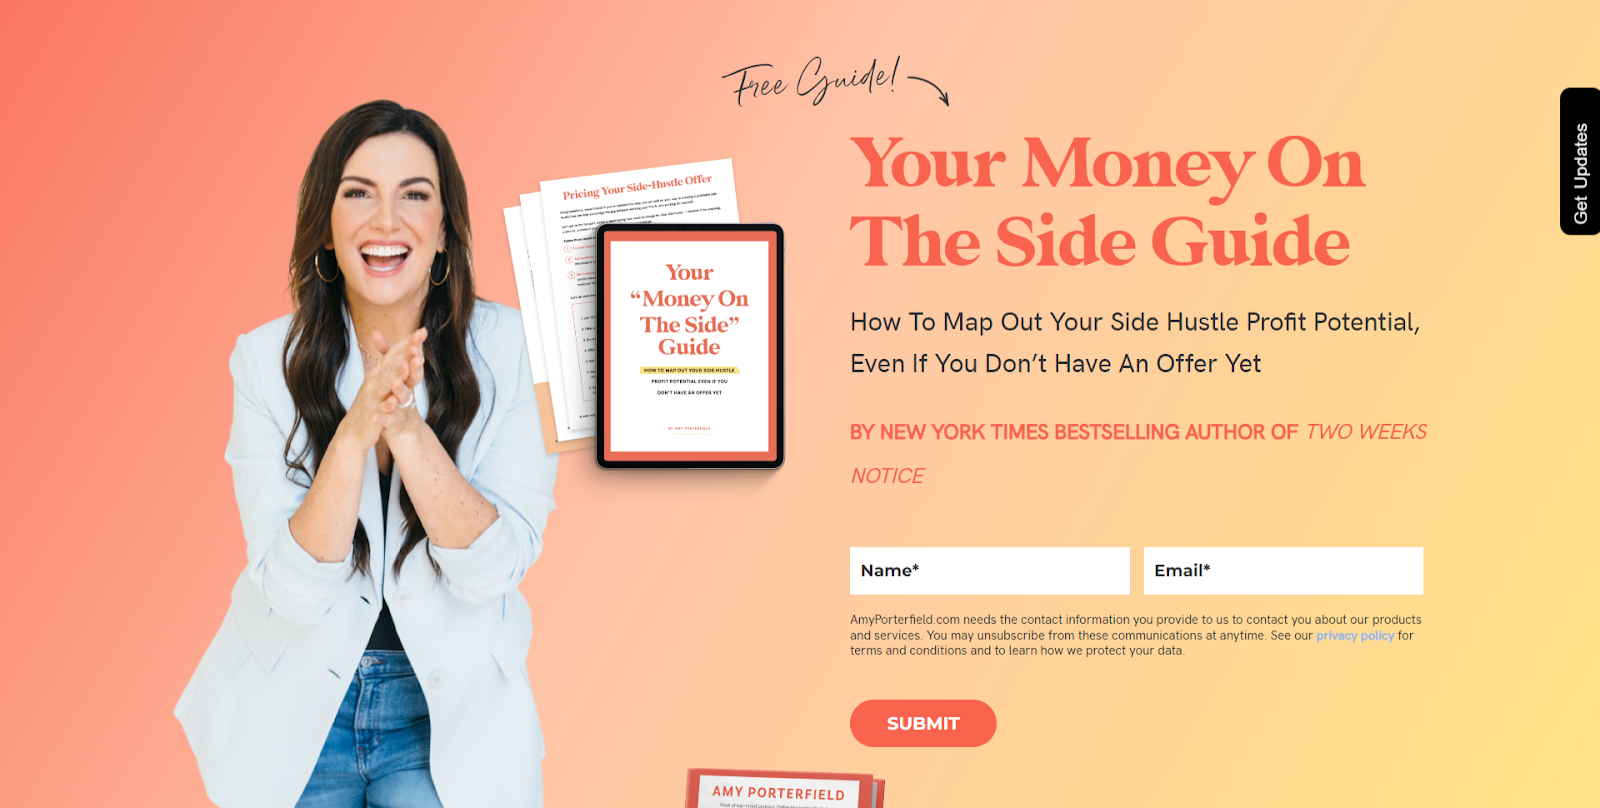 Amy Porterfield's opt-in page for her free "Your Money On The Side Guide"